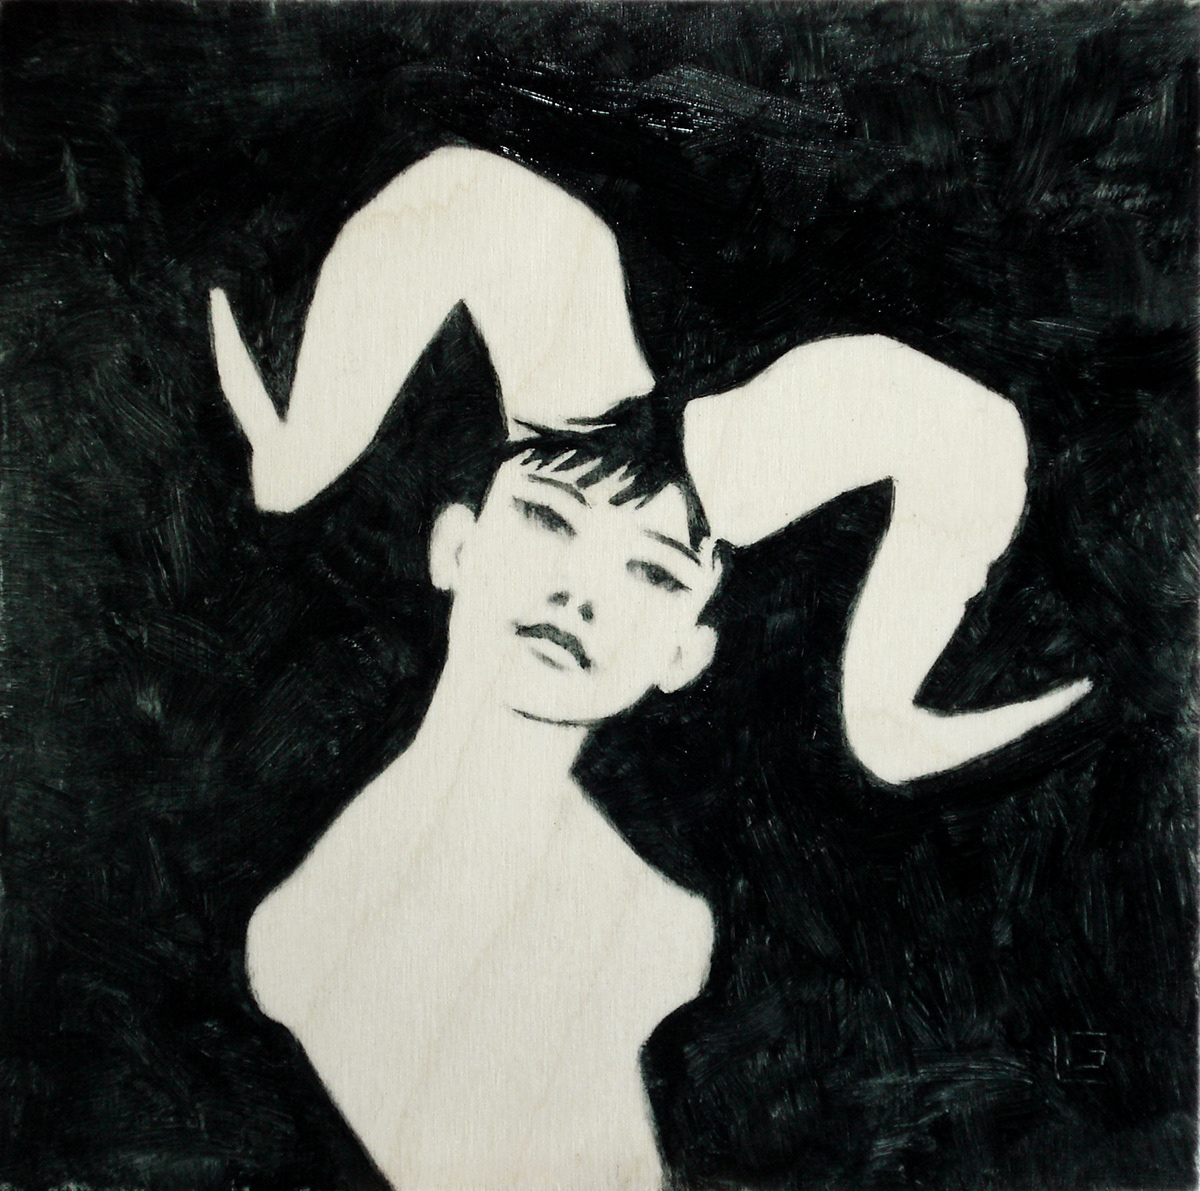 woman  figure  black and White  oil painting  Wood  Horns  fashion